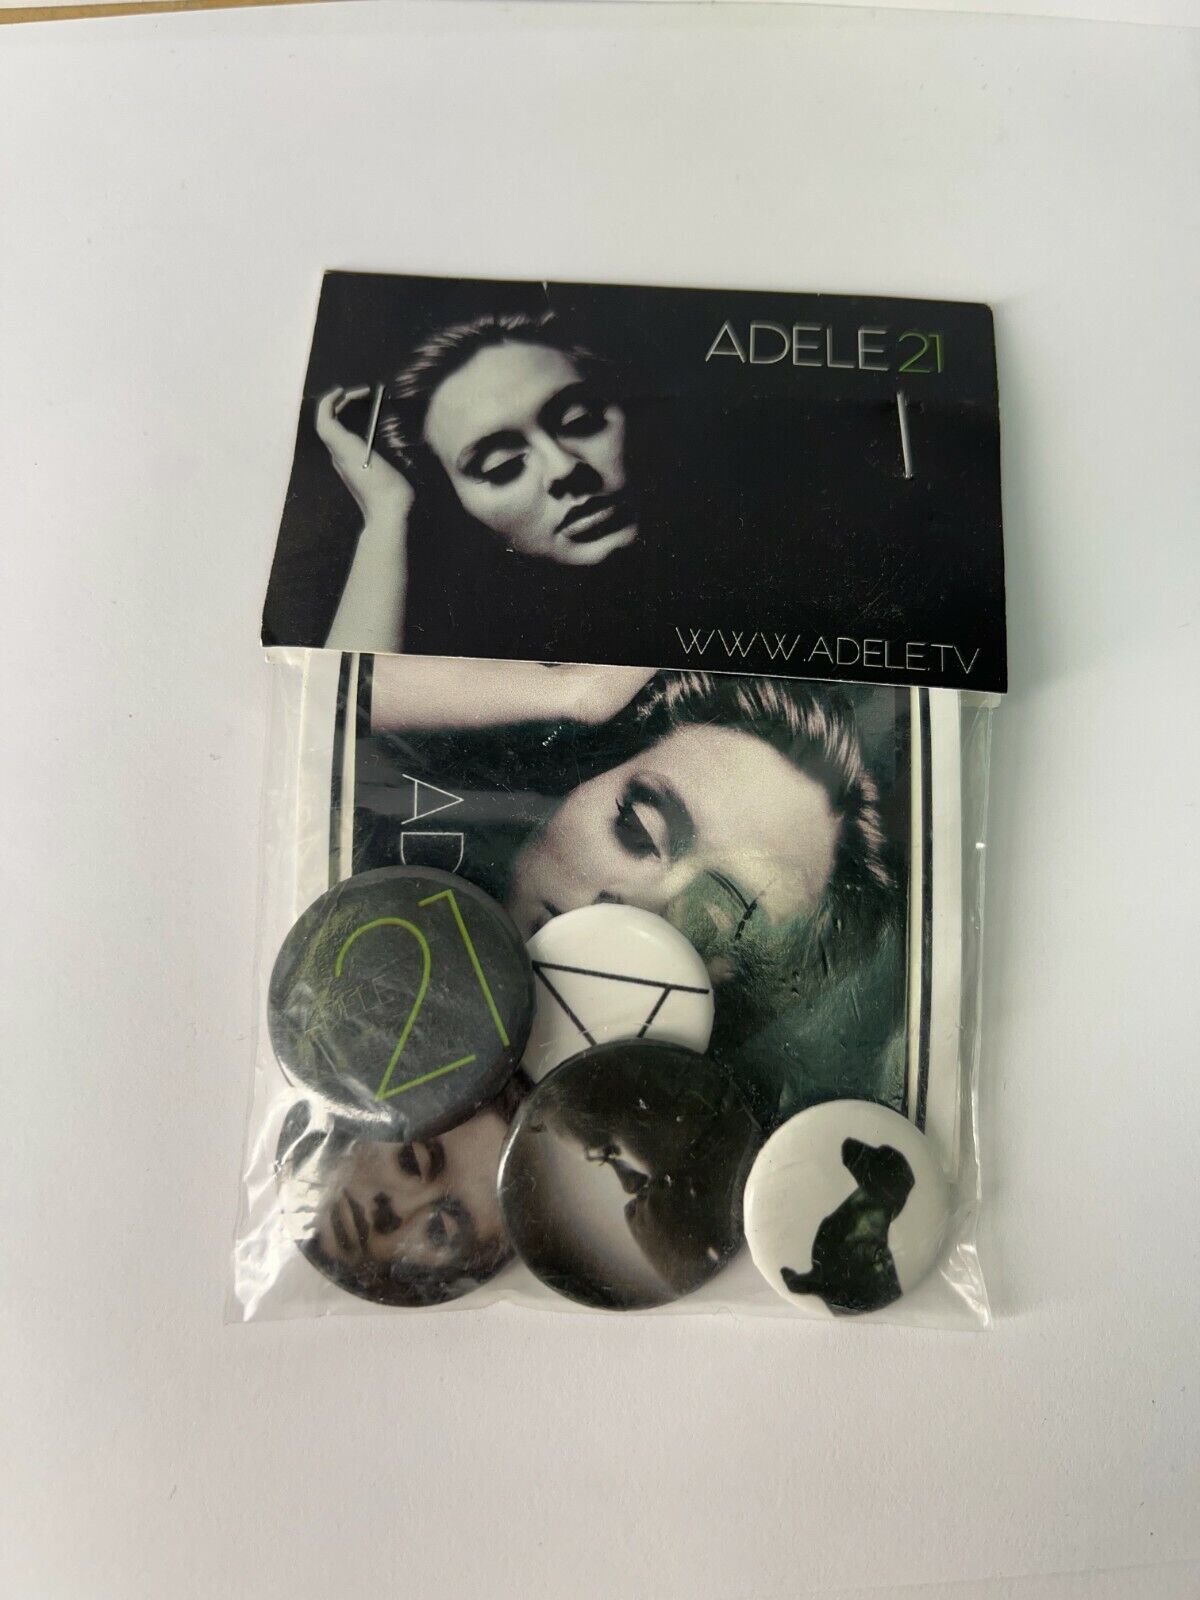 Adele 21 pin and stickers set  NEW COLLECTABLE ITEM OFFICIAL MERCHANDISE 